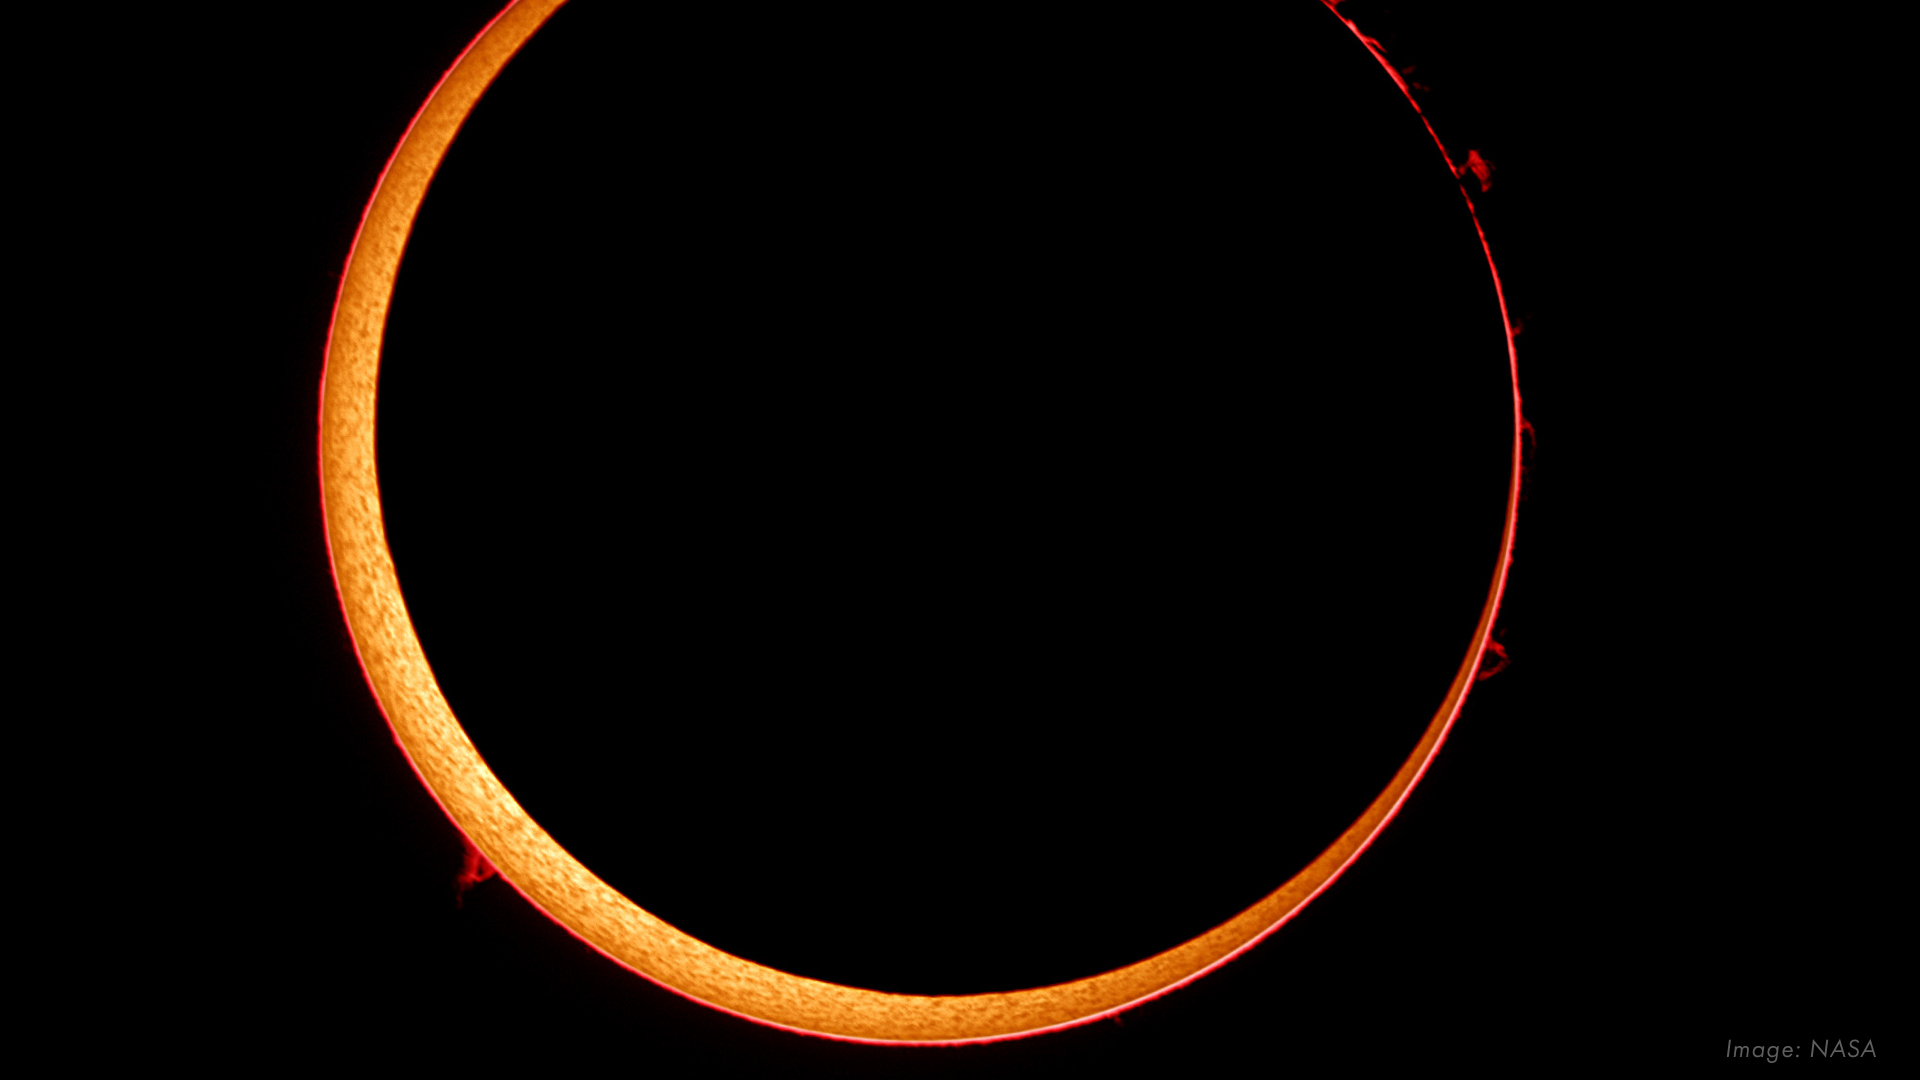 FAQs for Saturday's Annular Eclipse